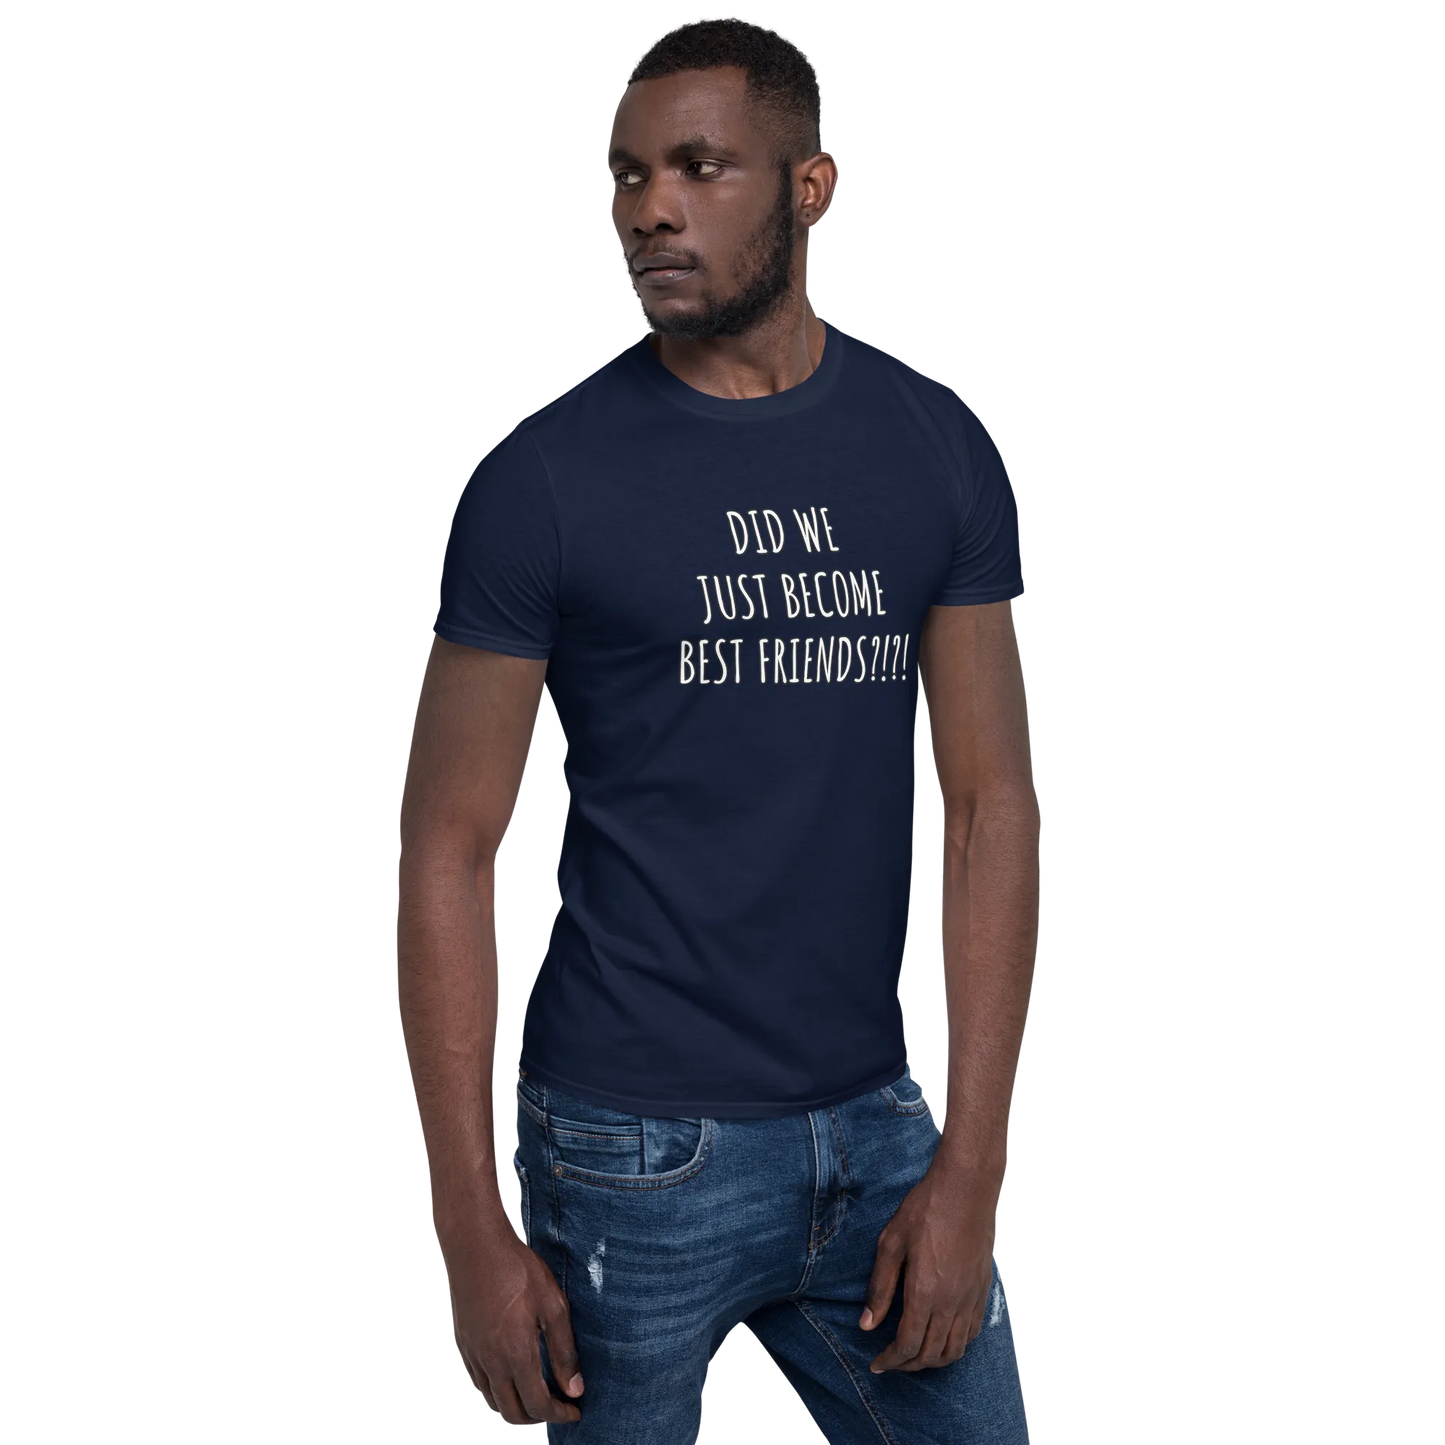 Did We Just Become Best Friends Tee in Navy on man front